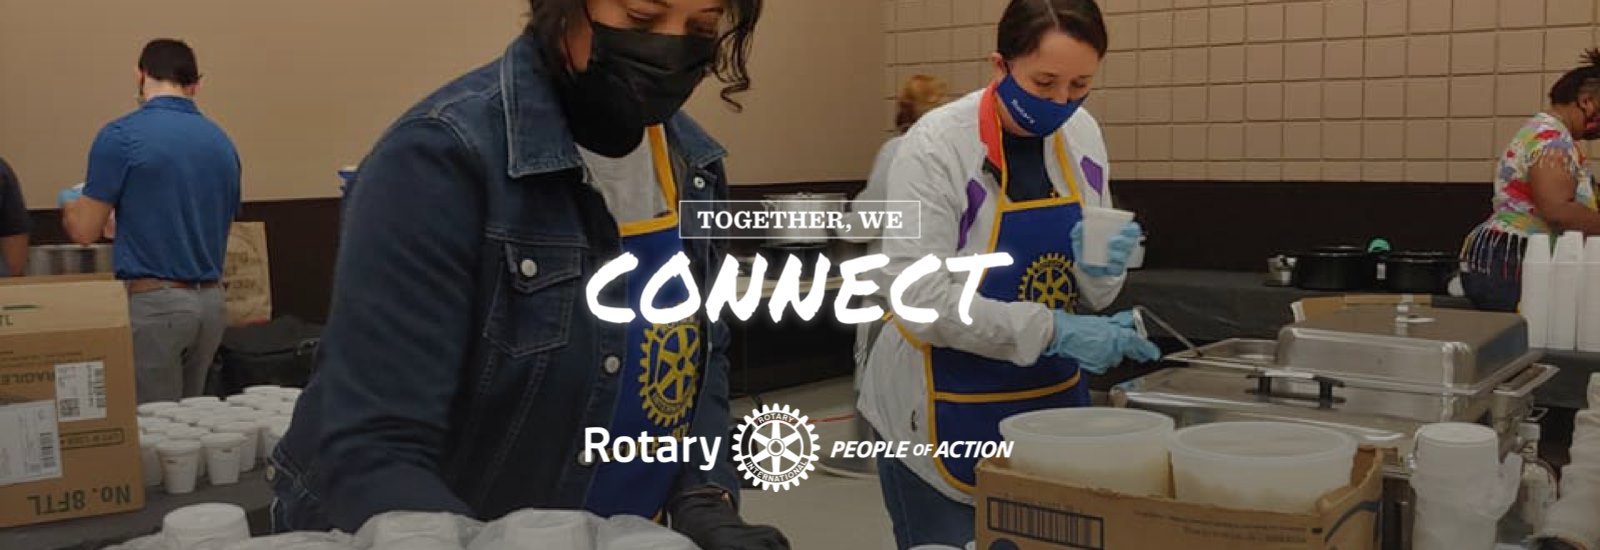 Rotary Club of Port Arthur logo with Taste of Gumbo background workers